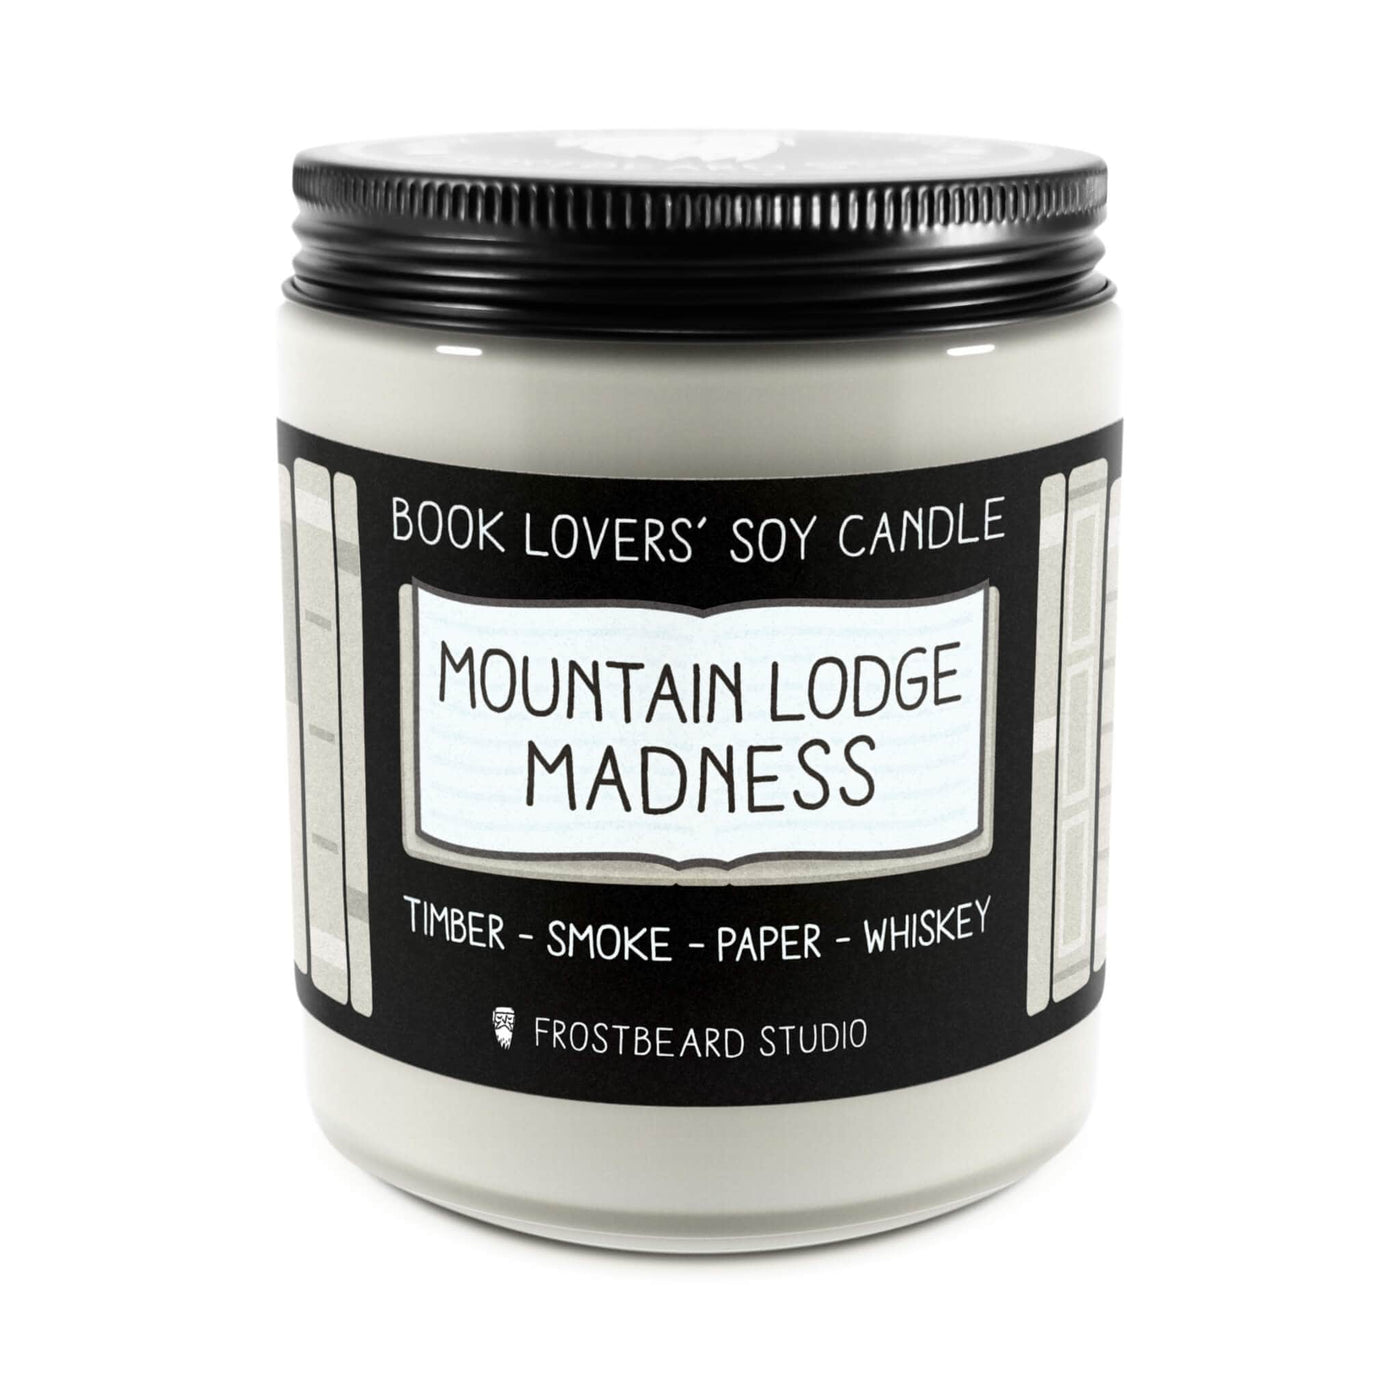 Mountain Lodge Madness - 8 oz Jar - Book Lovers' Soy Candle - Frostbeard Studio